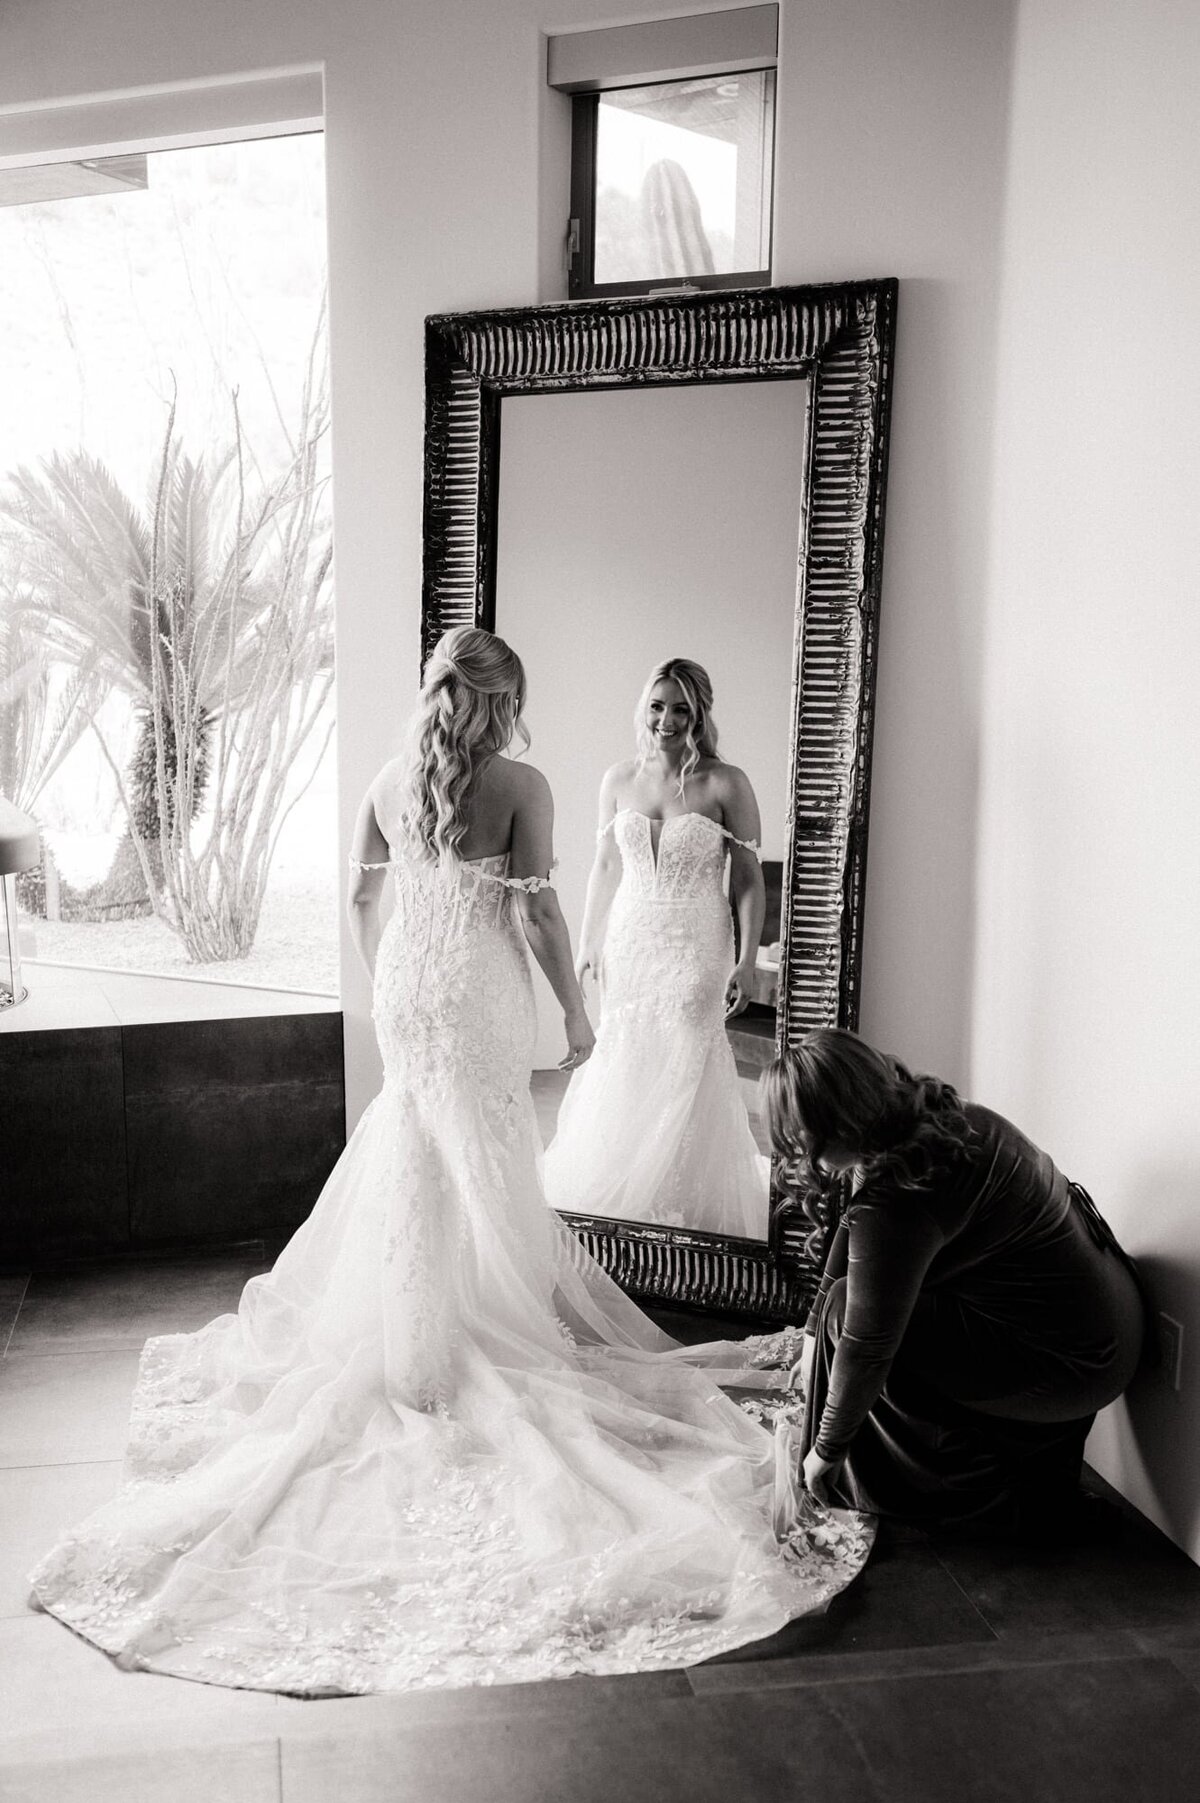 Bride looking at herself in a large mirror while bridesmaid fixes her train